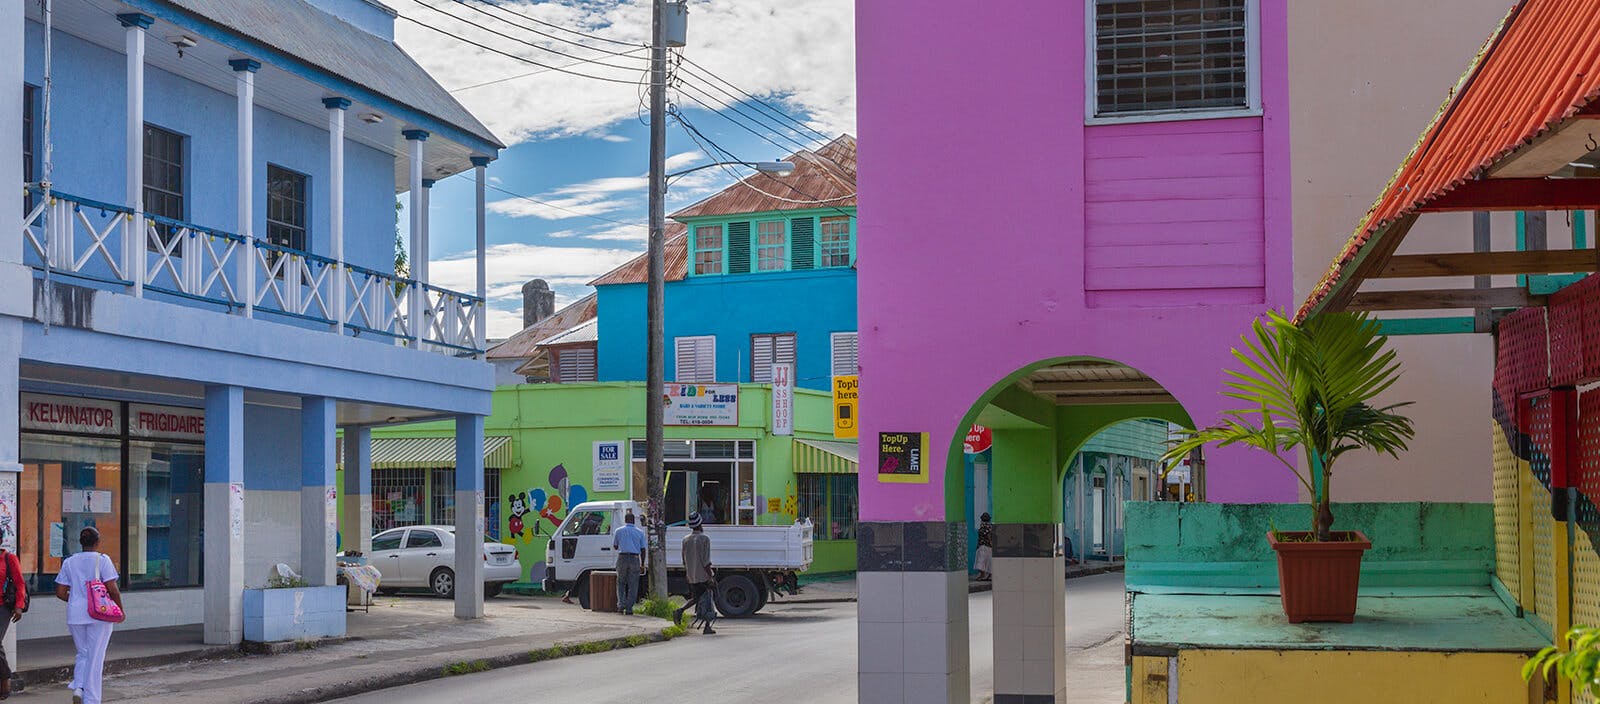 Speightstown Barbados historic city center